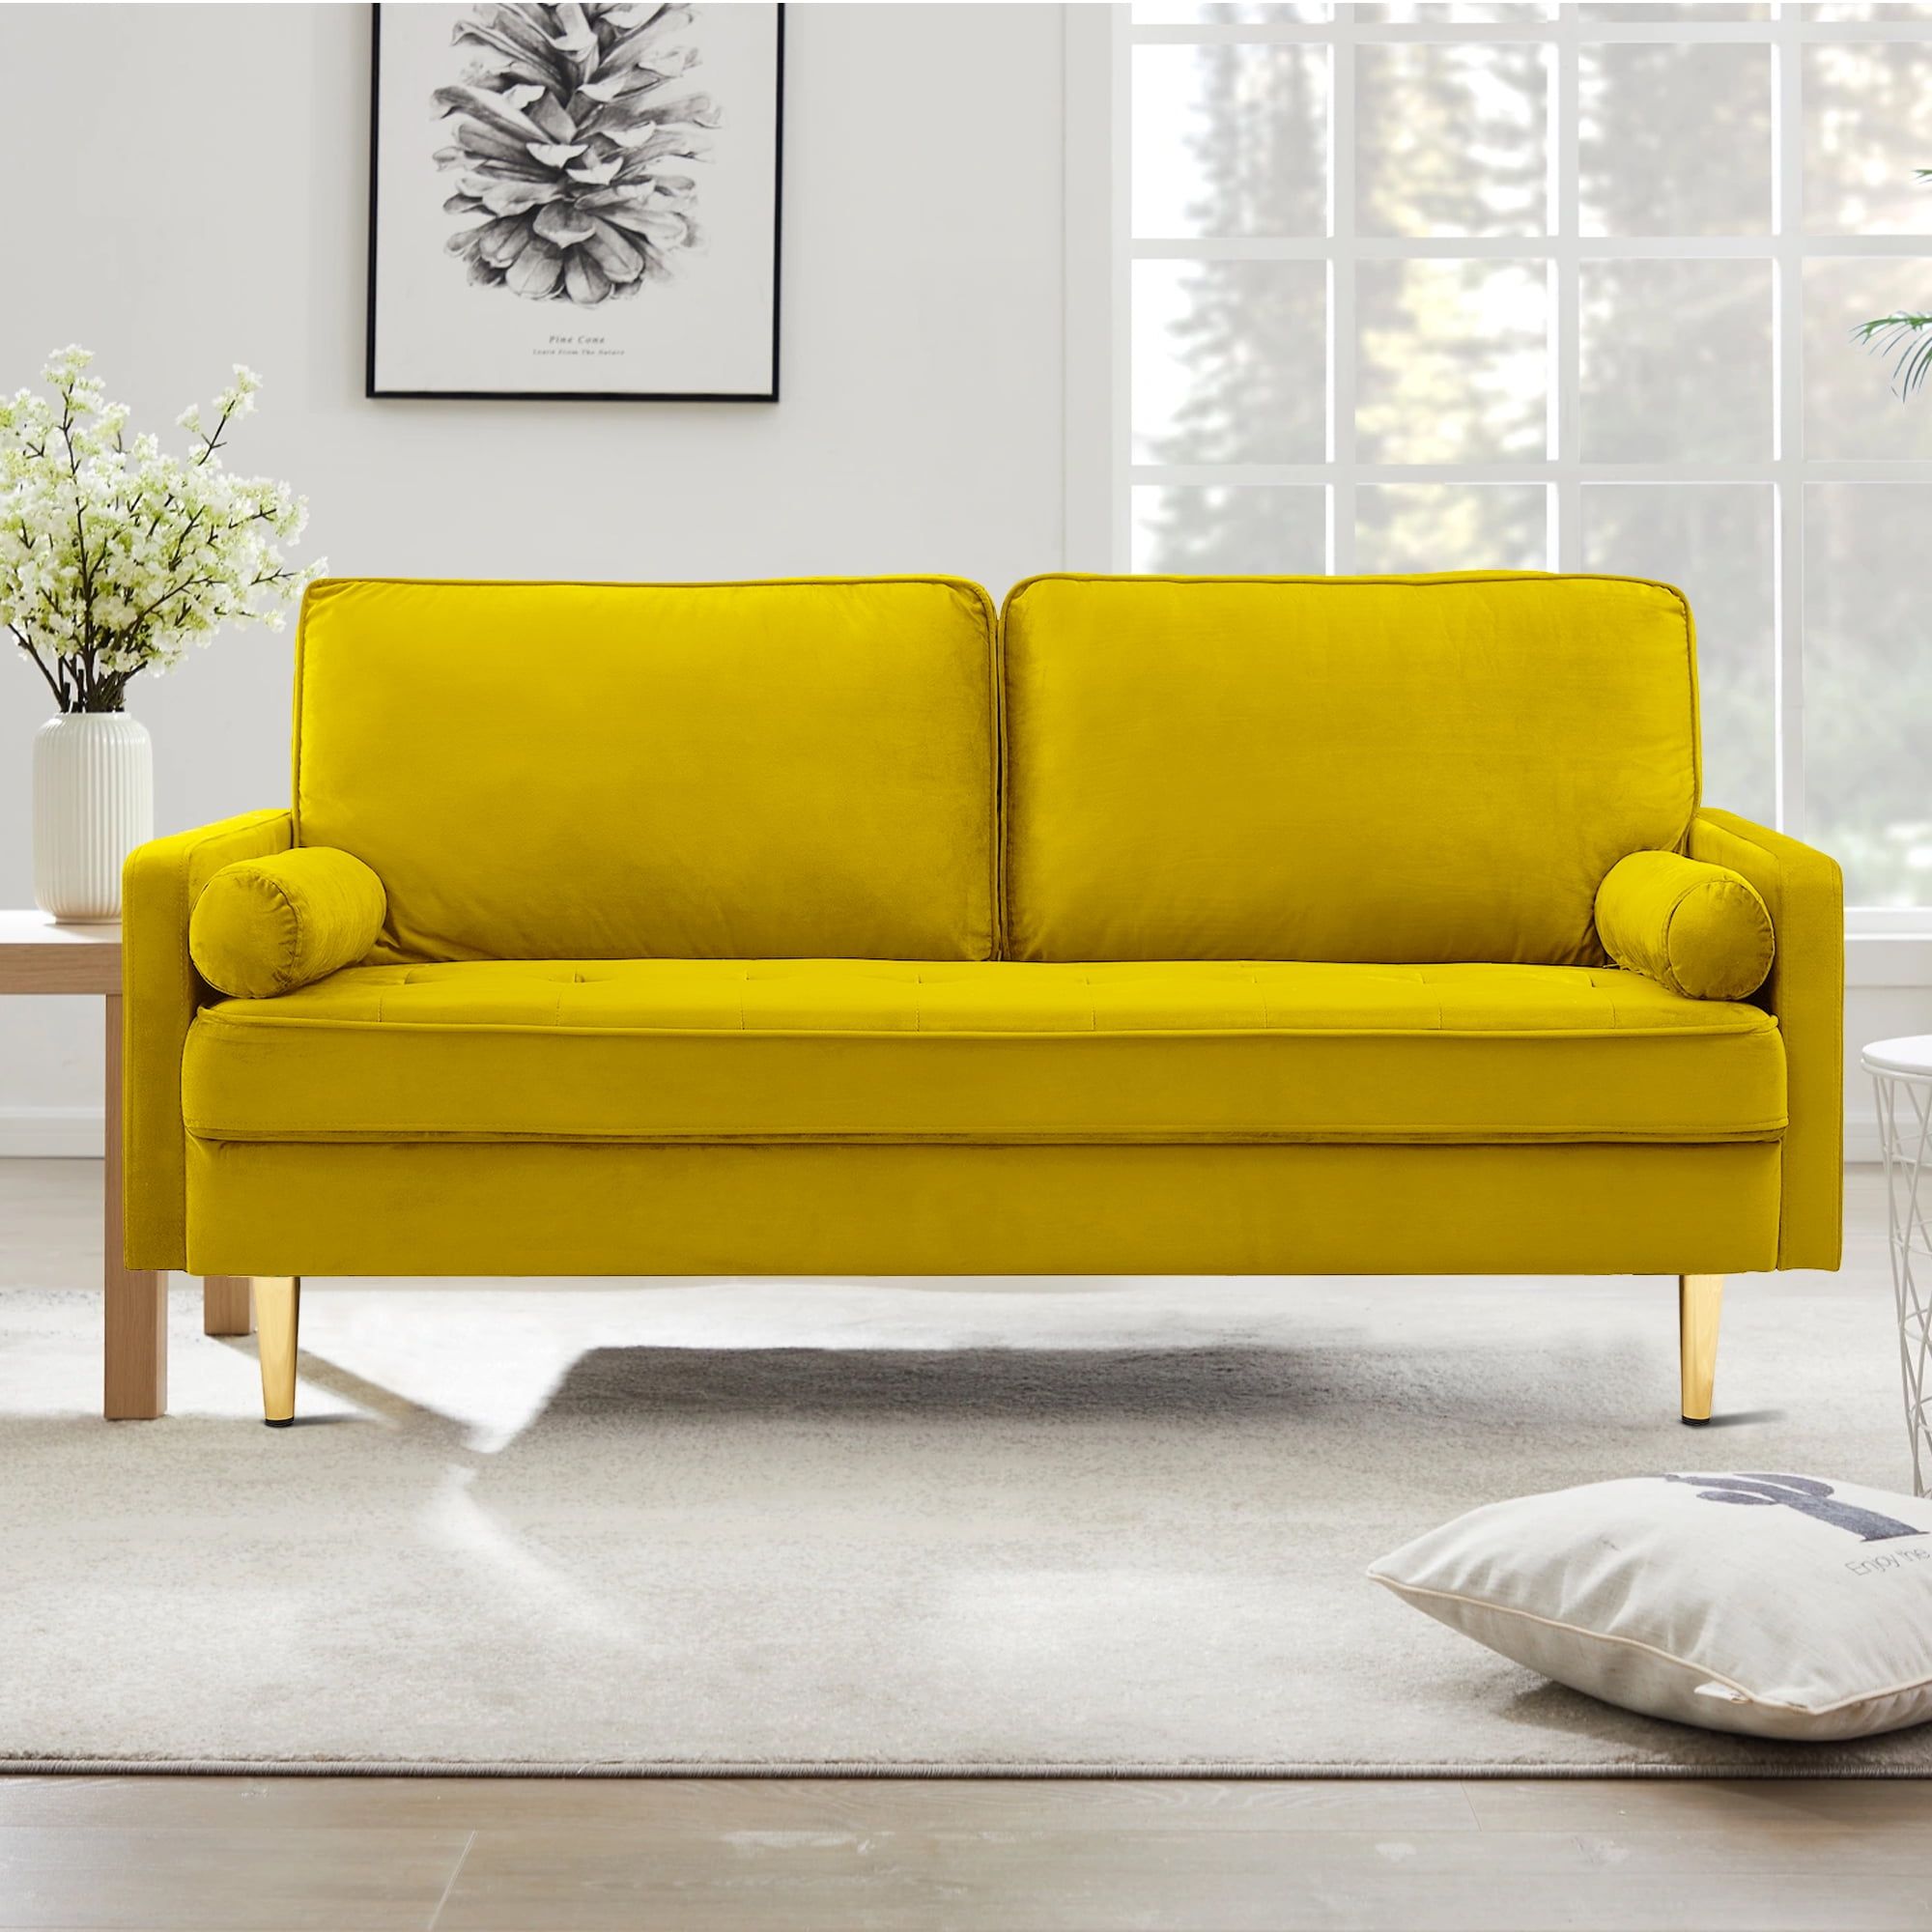 Kowilk Velvet Loveseat Sofa, 66.9'' Mid Century Modern Small Love Seats  With 2 Pillows & Golden Legs Comfy Couch For Living Room, Upholstered 2  Seater Sofa For Small Apartment ,Yellow – Walmart Pertaining To Small Love Seats In Velvet (Photo 9 of 15)